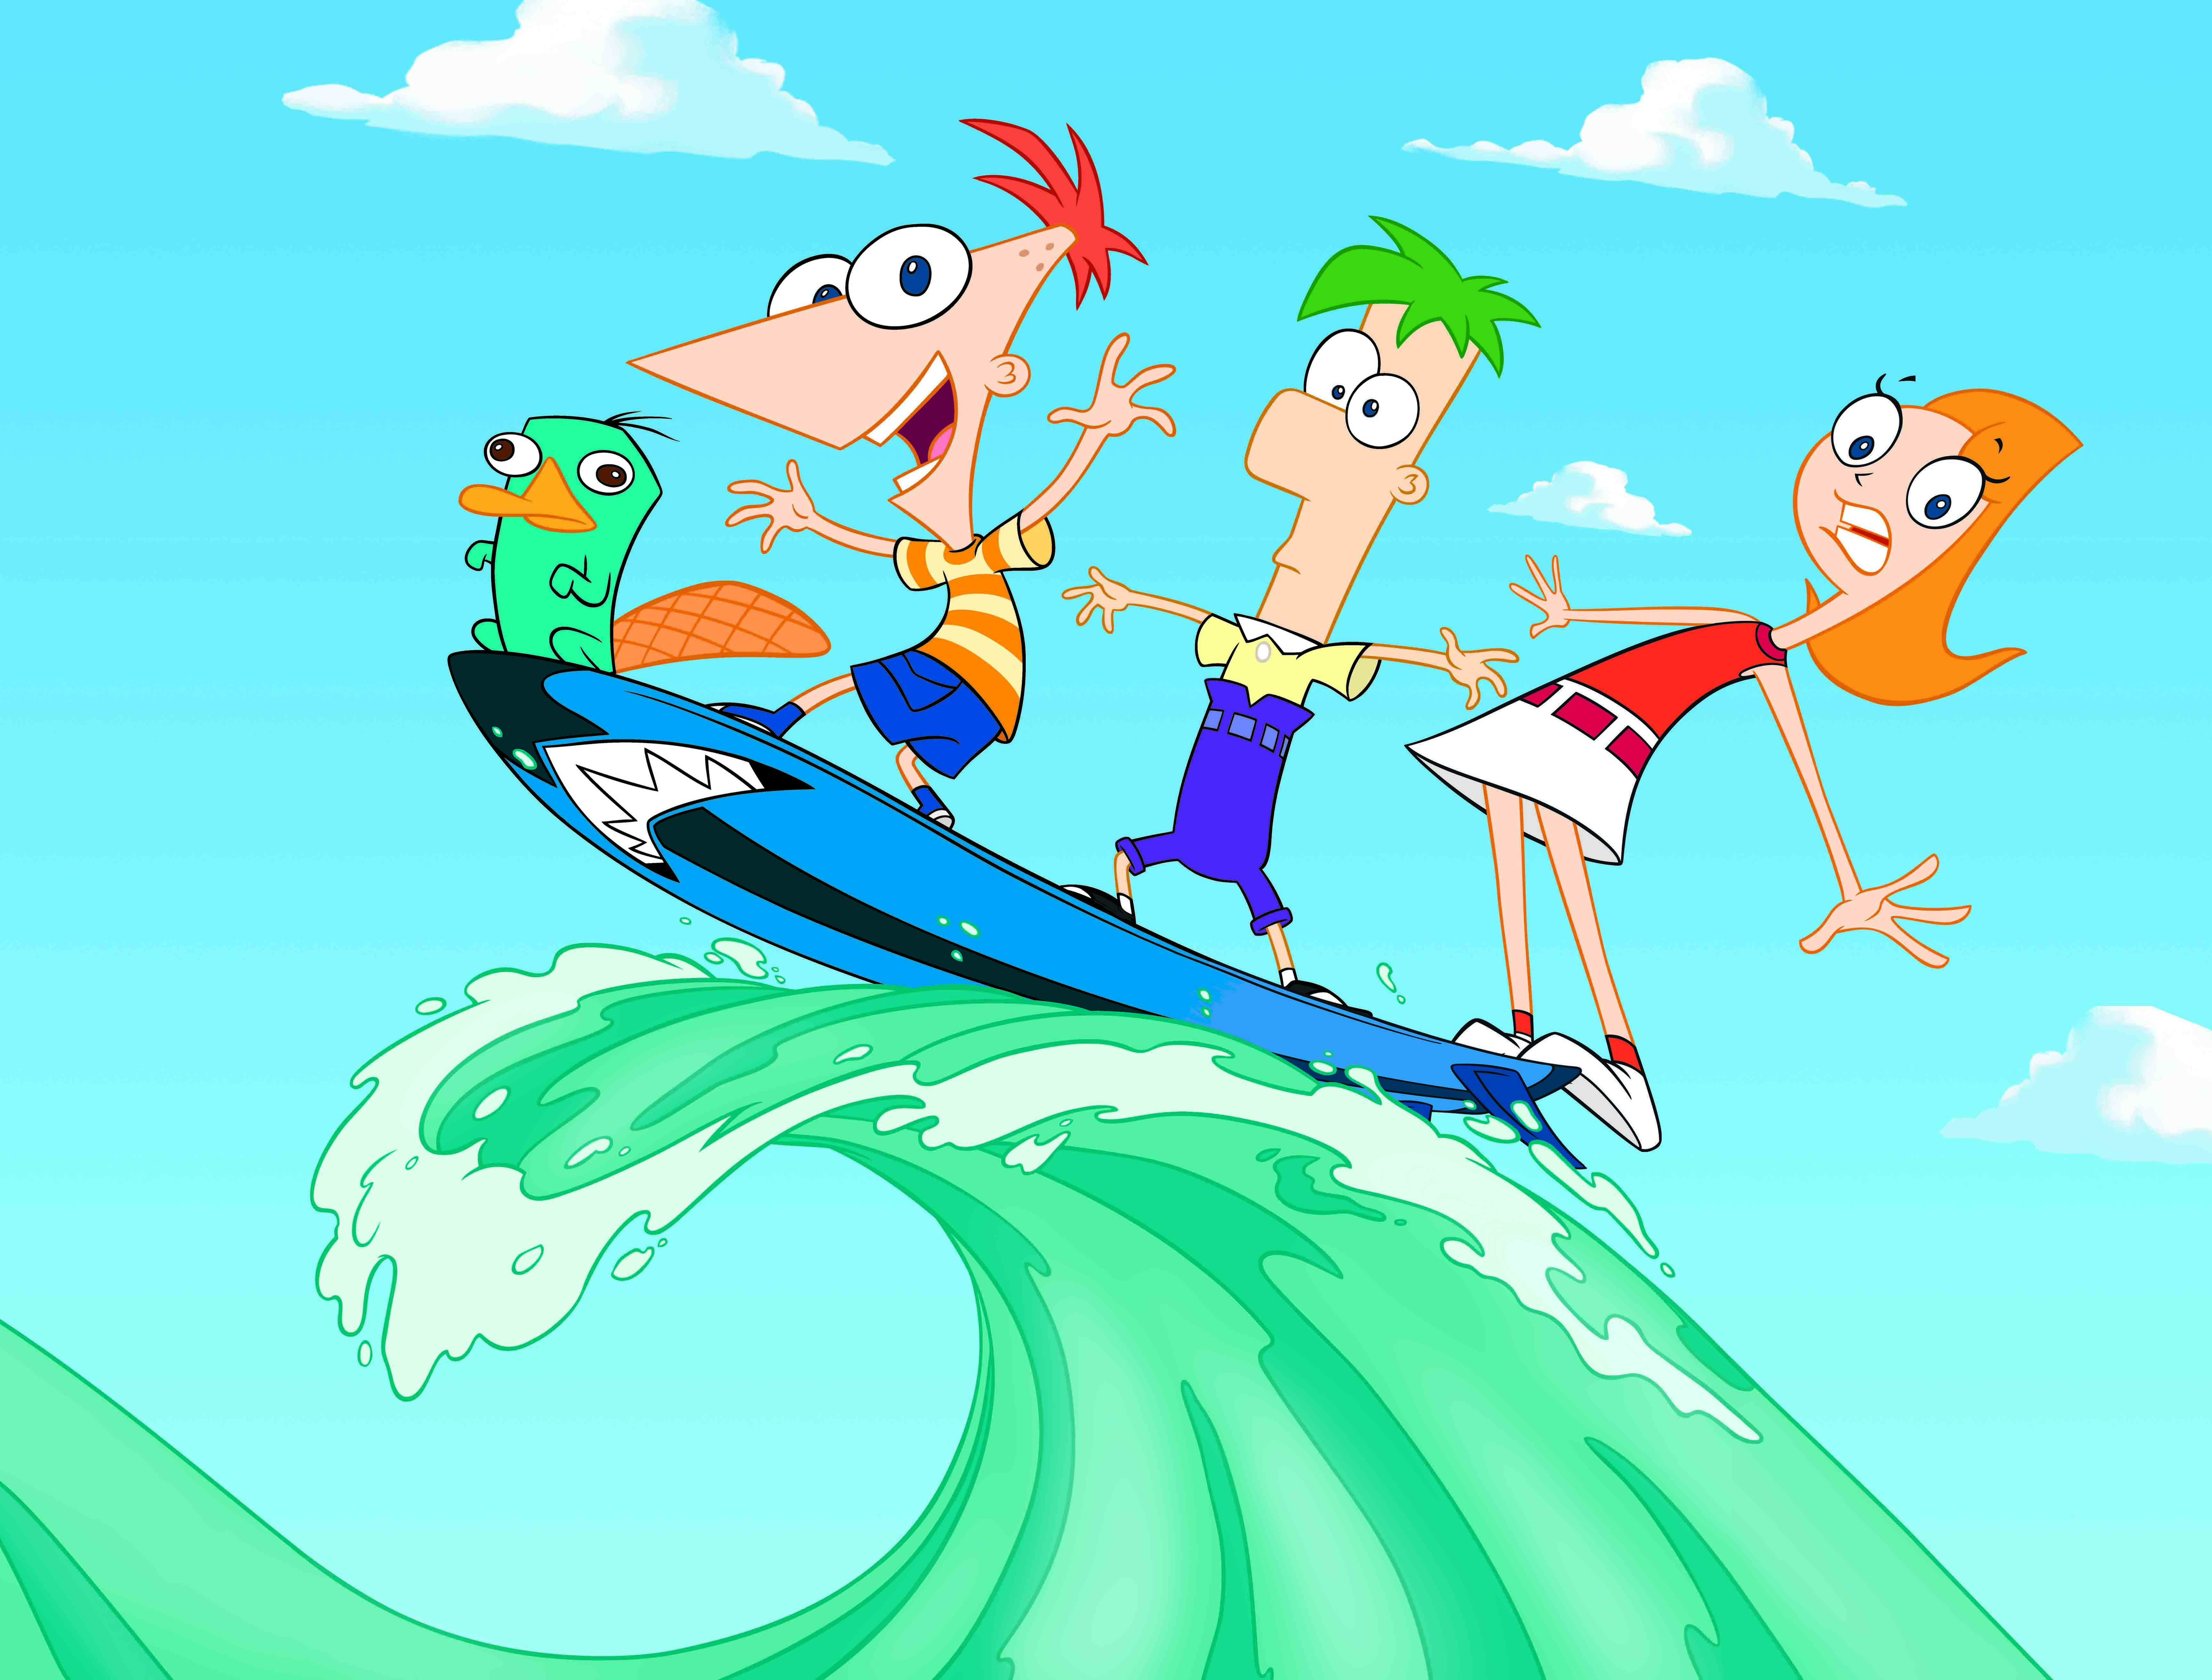 Phineas & Ferb Theme Song | Movie Theme Songs & TV Soundtracks